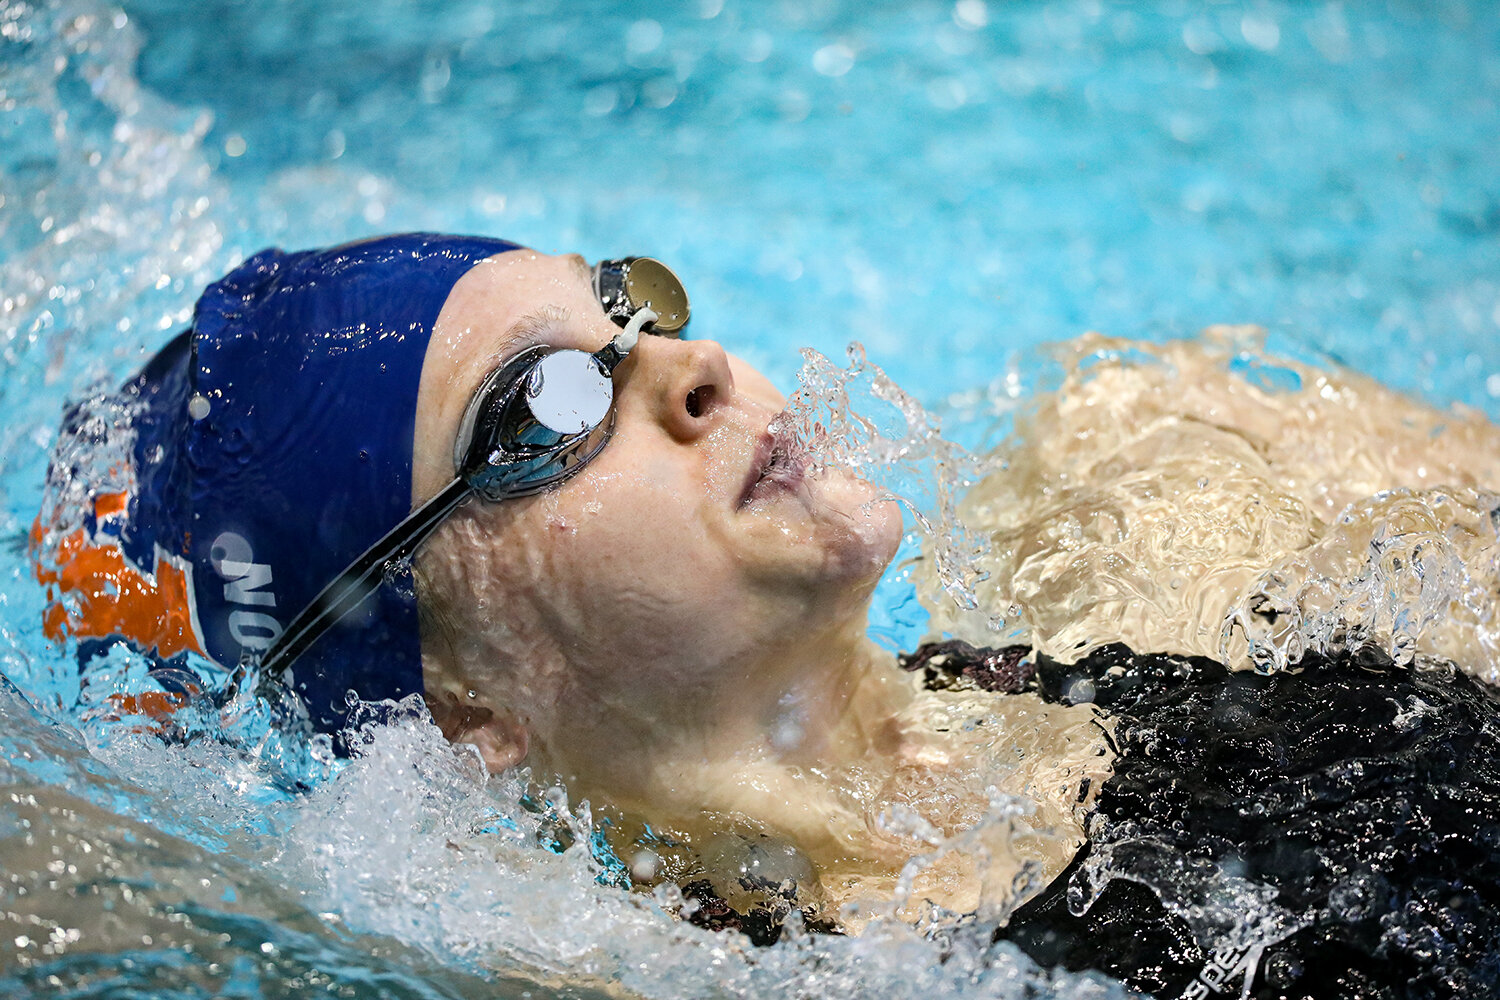  Abby Olson swims a preliminary heat in the 200 yard backstroke during the Big Ten Women’s Swimming and Diving Championships at the Campus Welfare and Recreation Center in Iowa City, IA on Saturday, Feb. 22, 2020.  